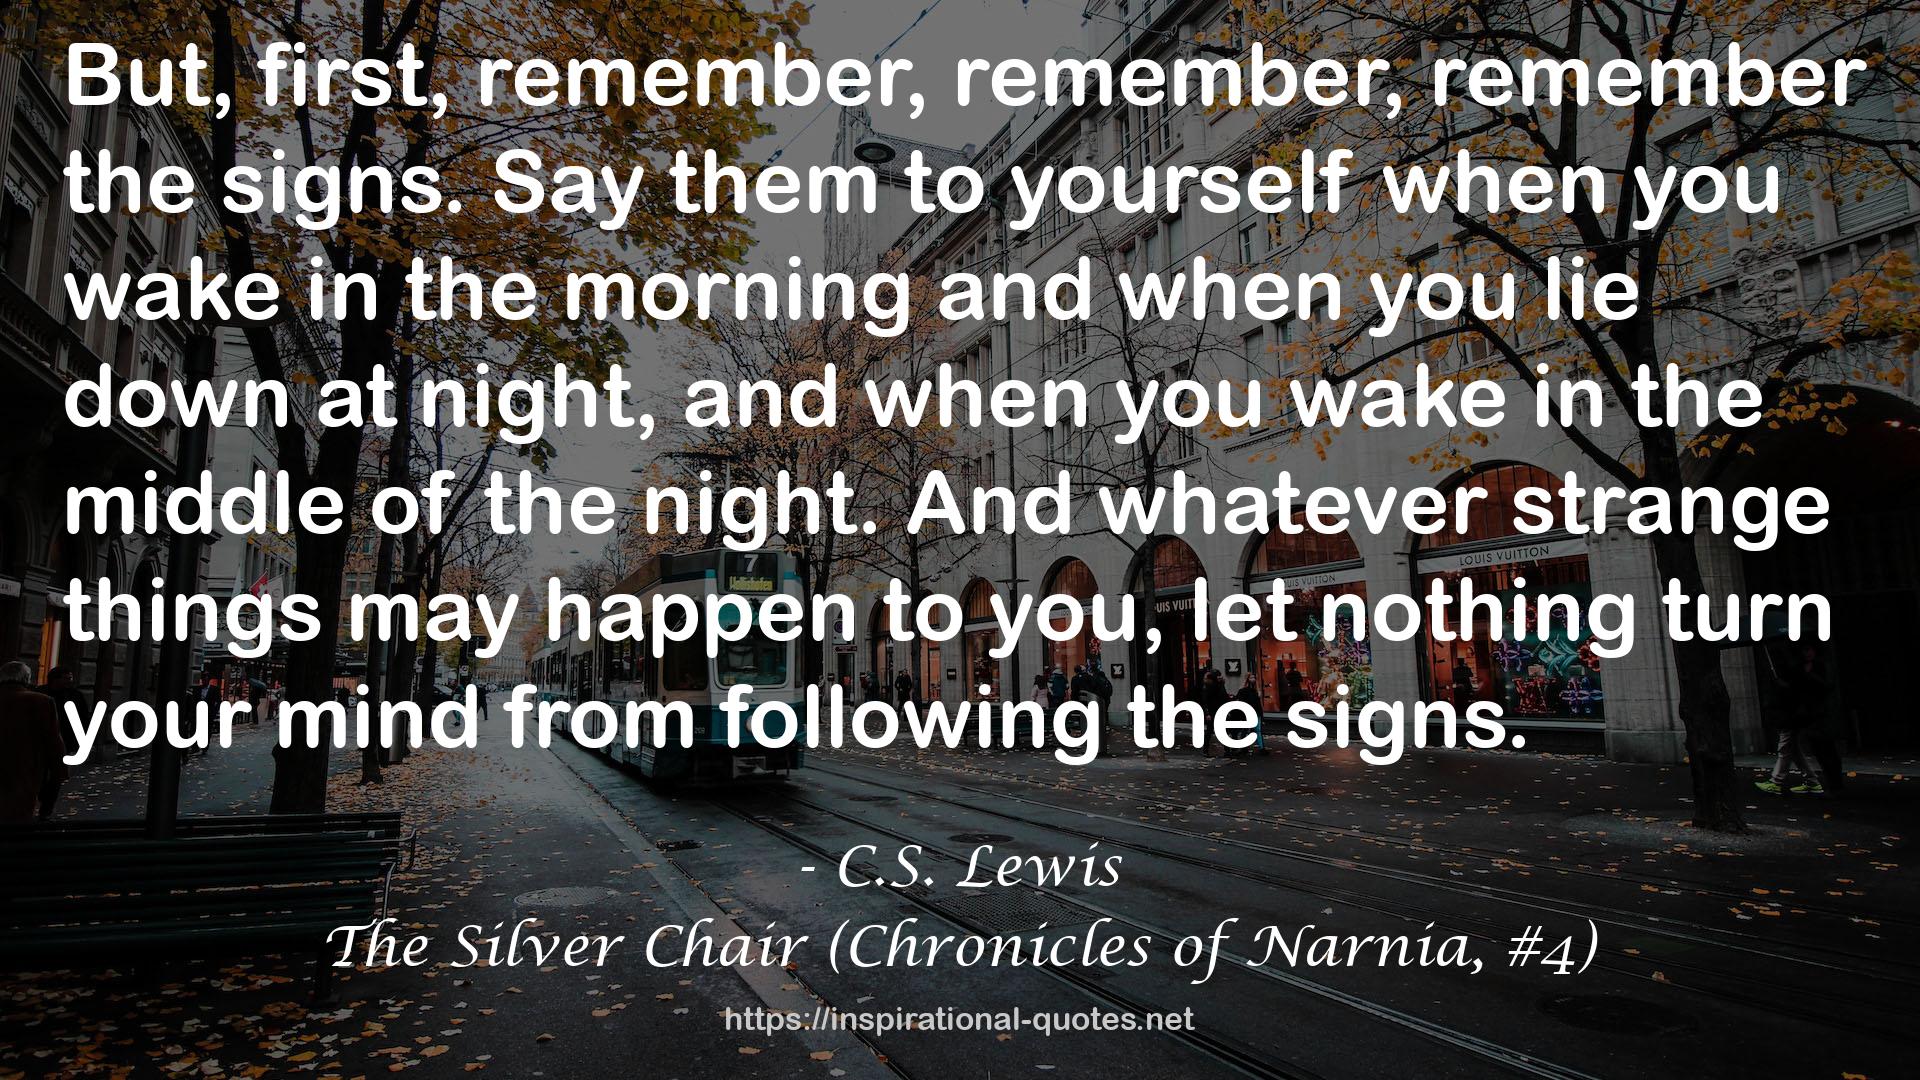 The Silver Chair (Chronicles of Narnia, #4) QUOTES